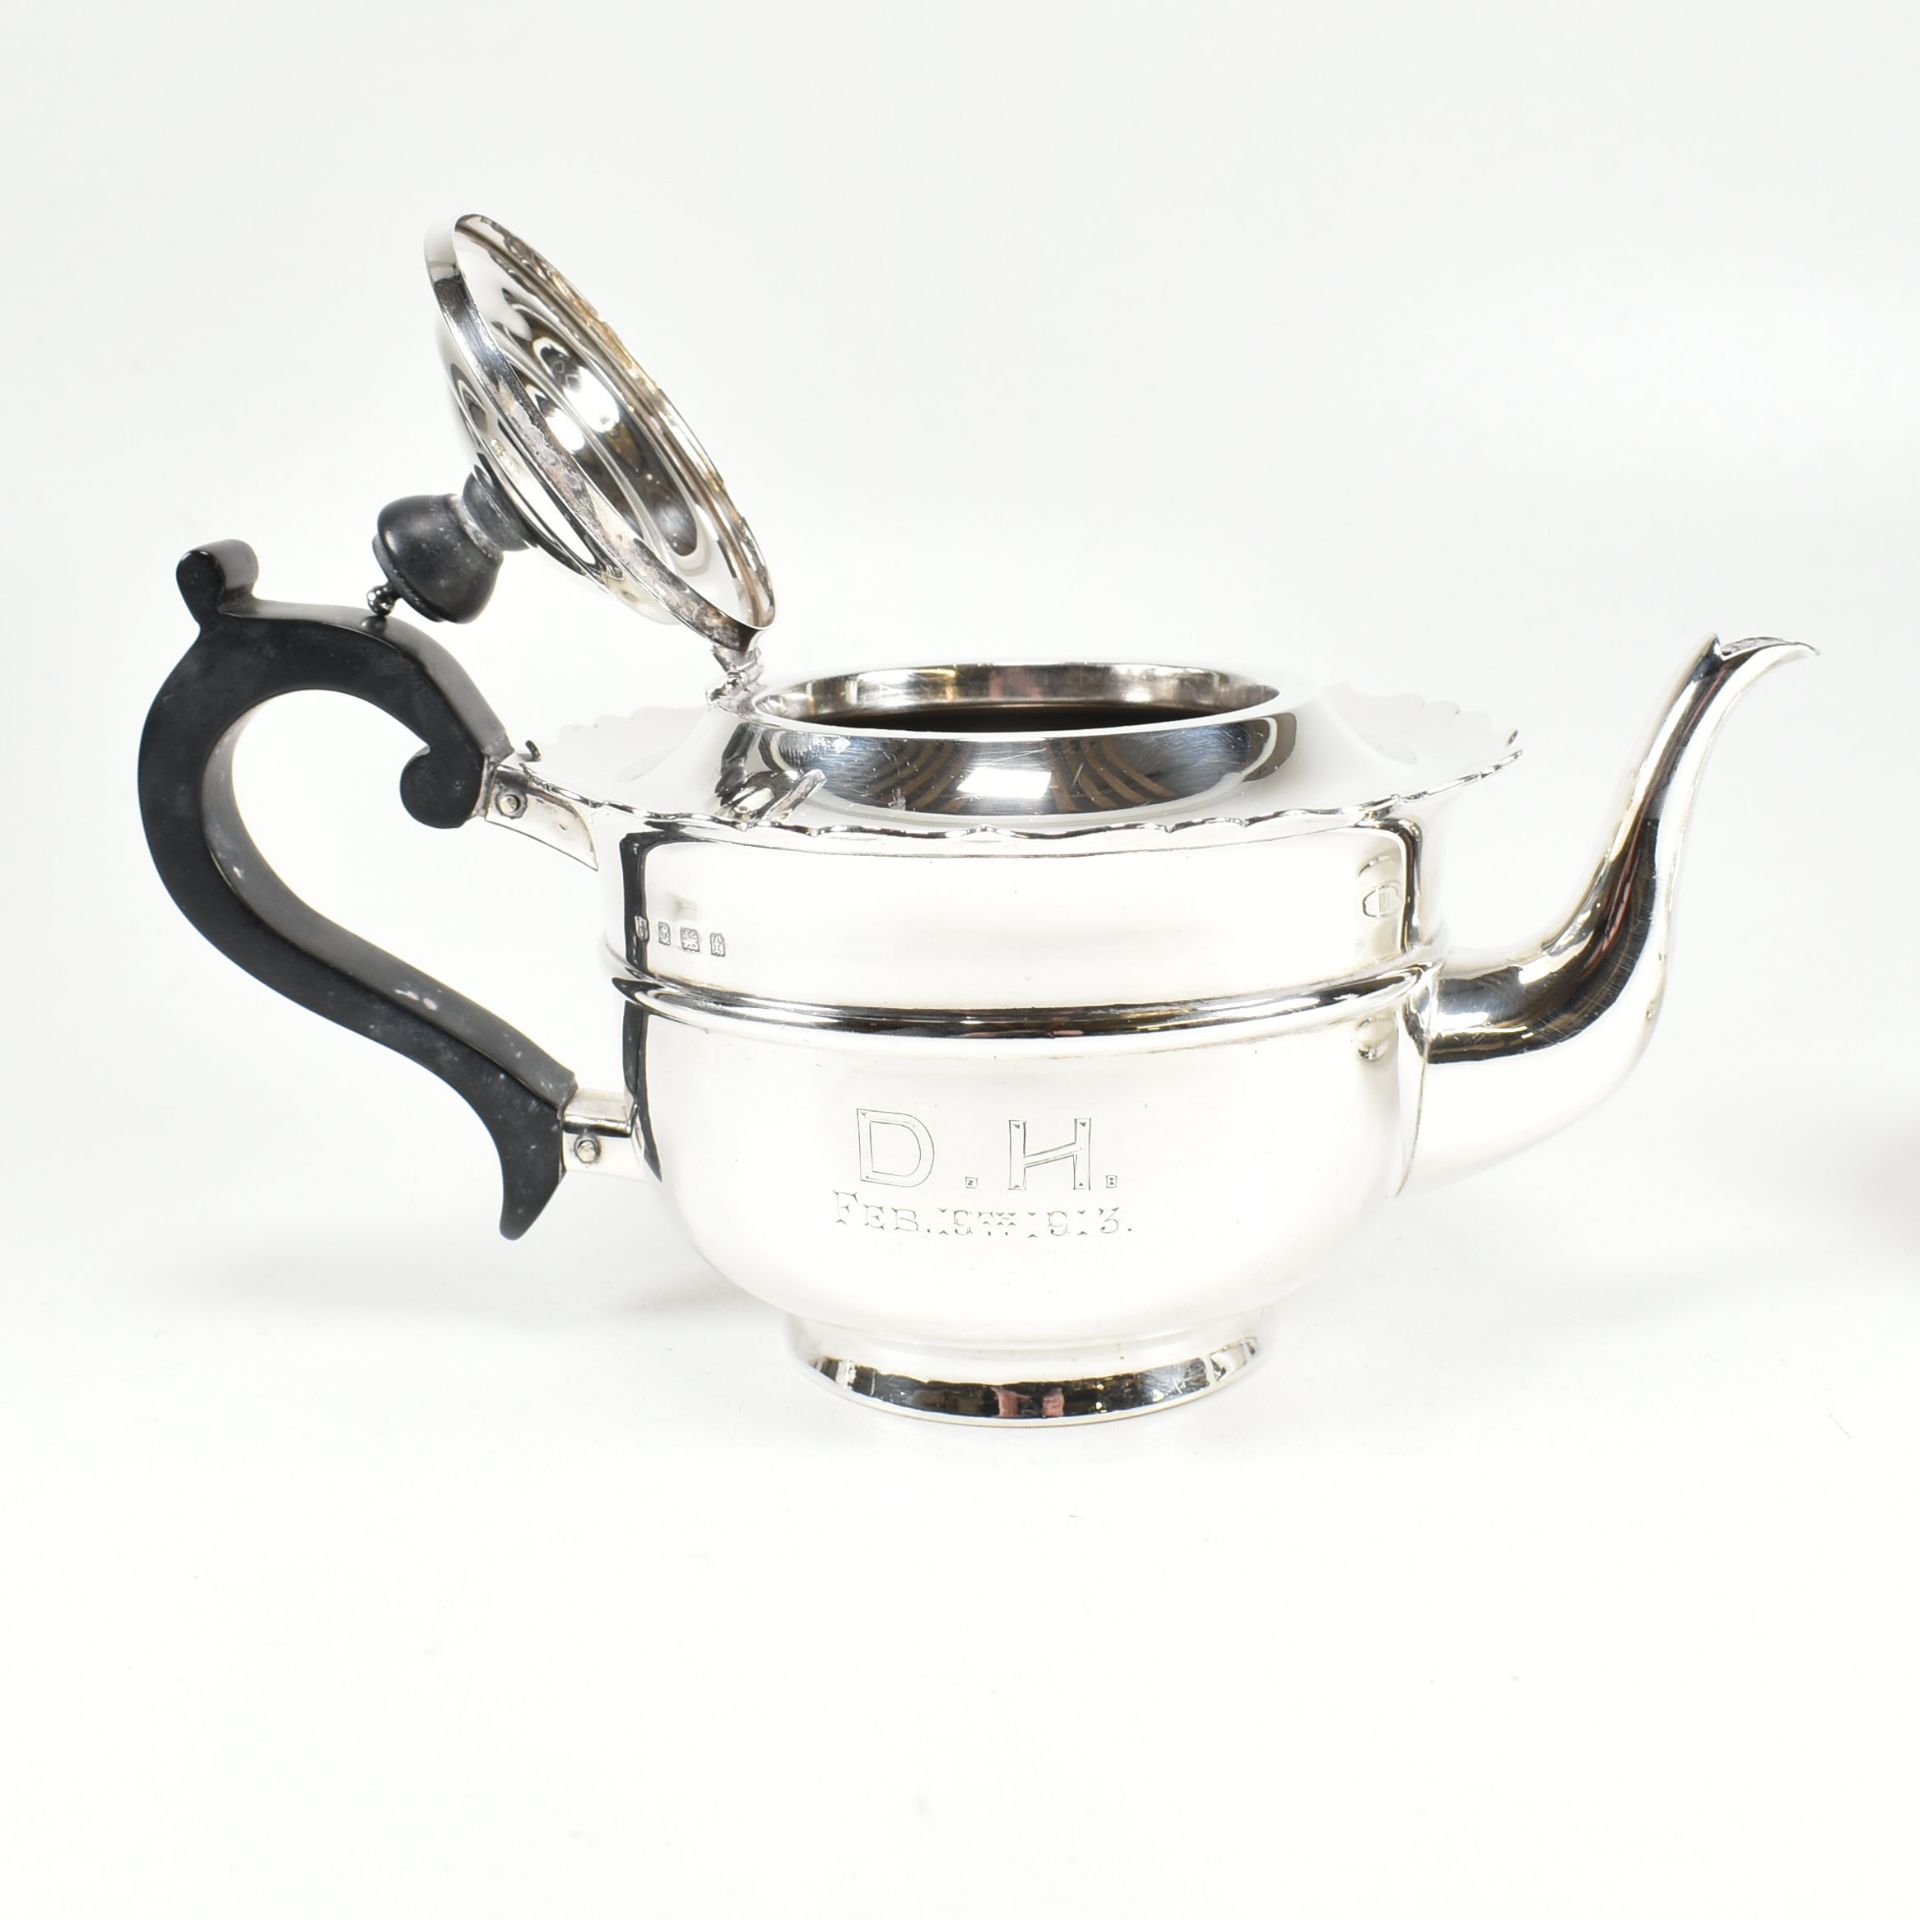 EARLY 20TH CENTURY HALLMARKED SILVER TEA SERVICE - Image 5 of 9